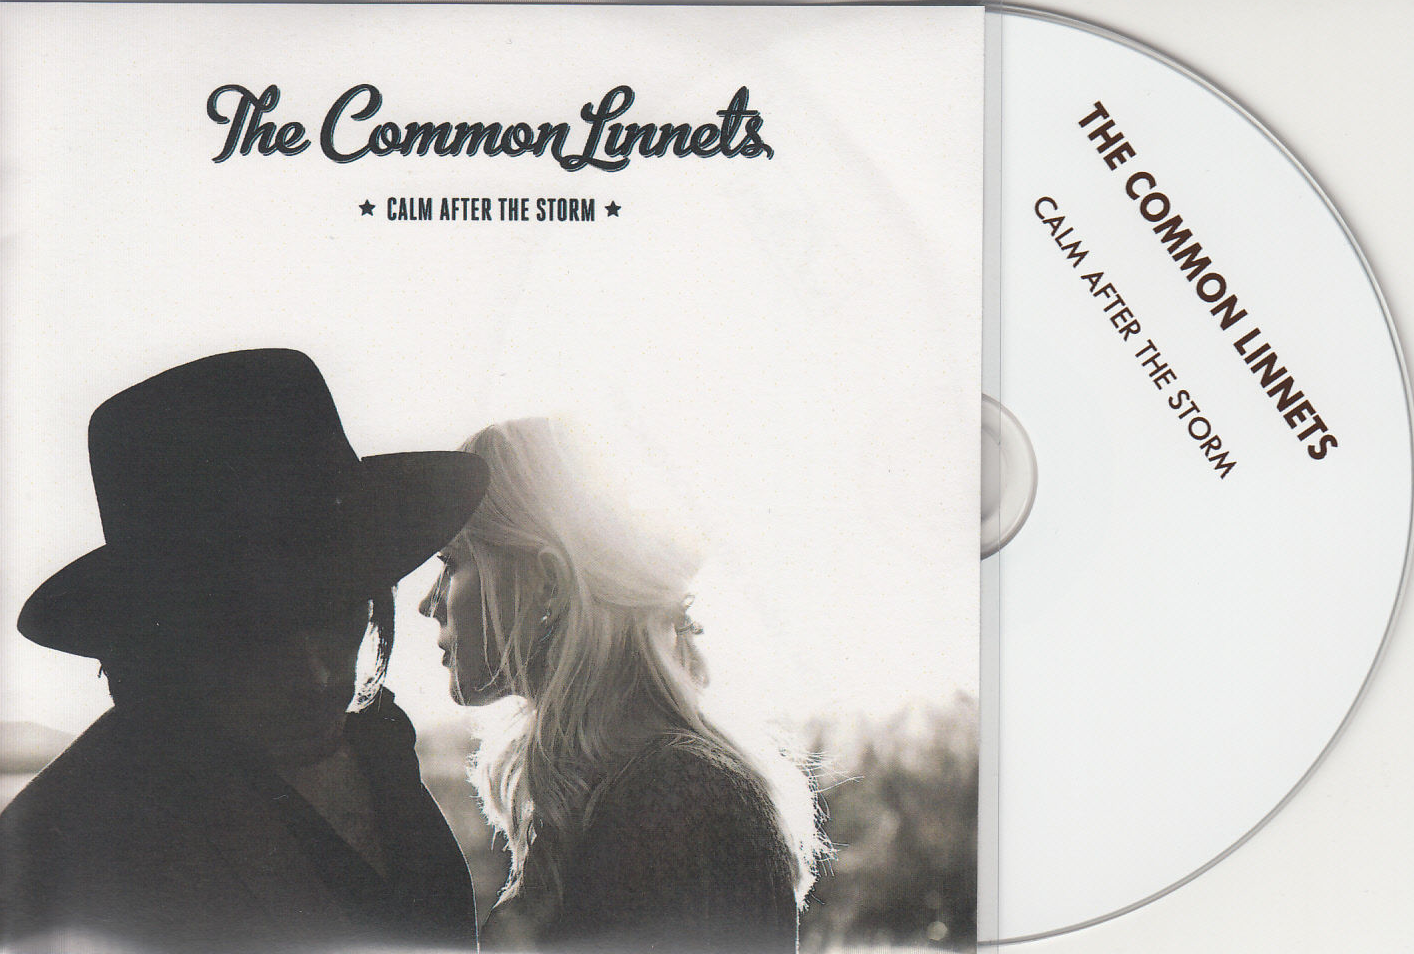 Common+linnets+UK+promo.png